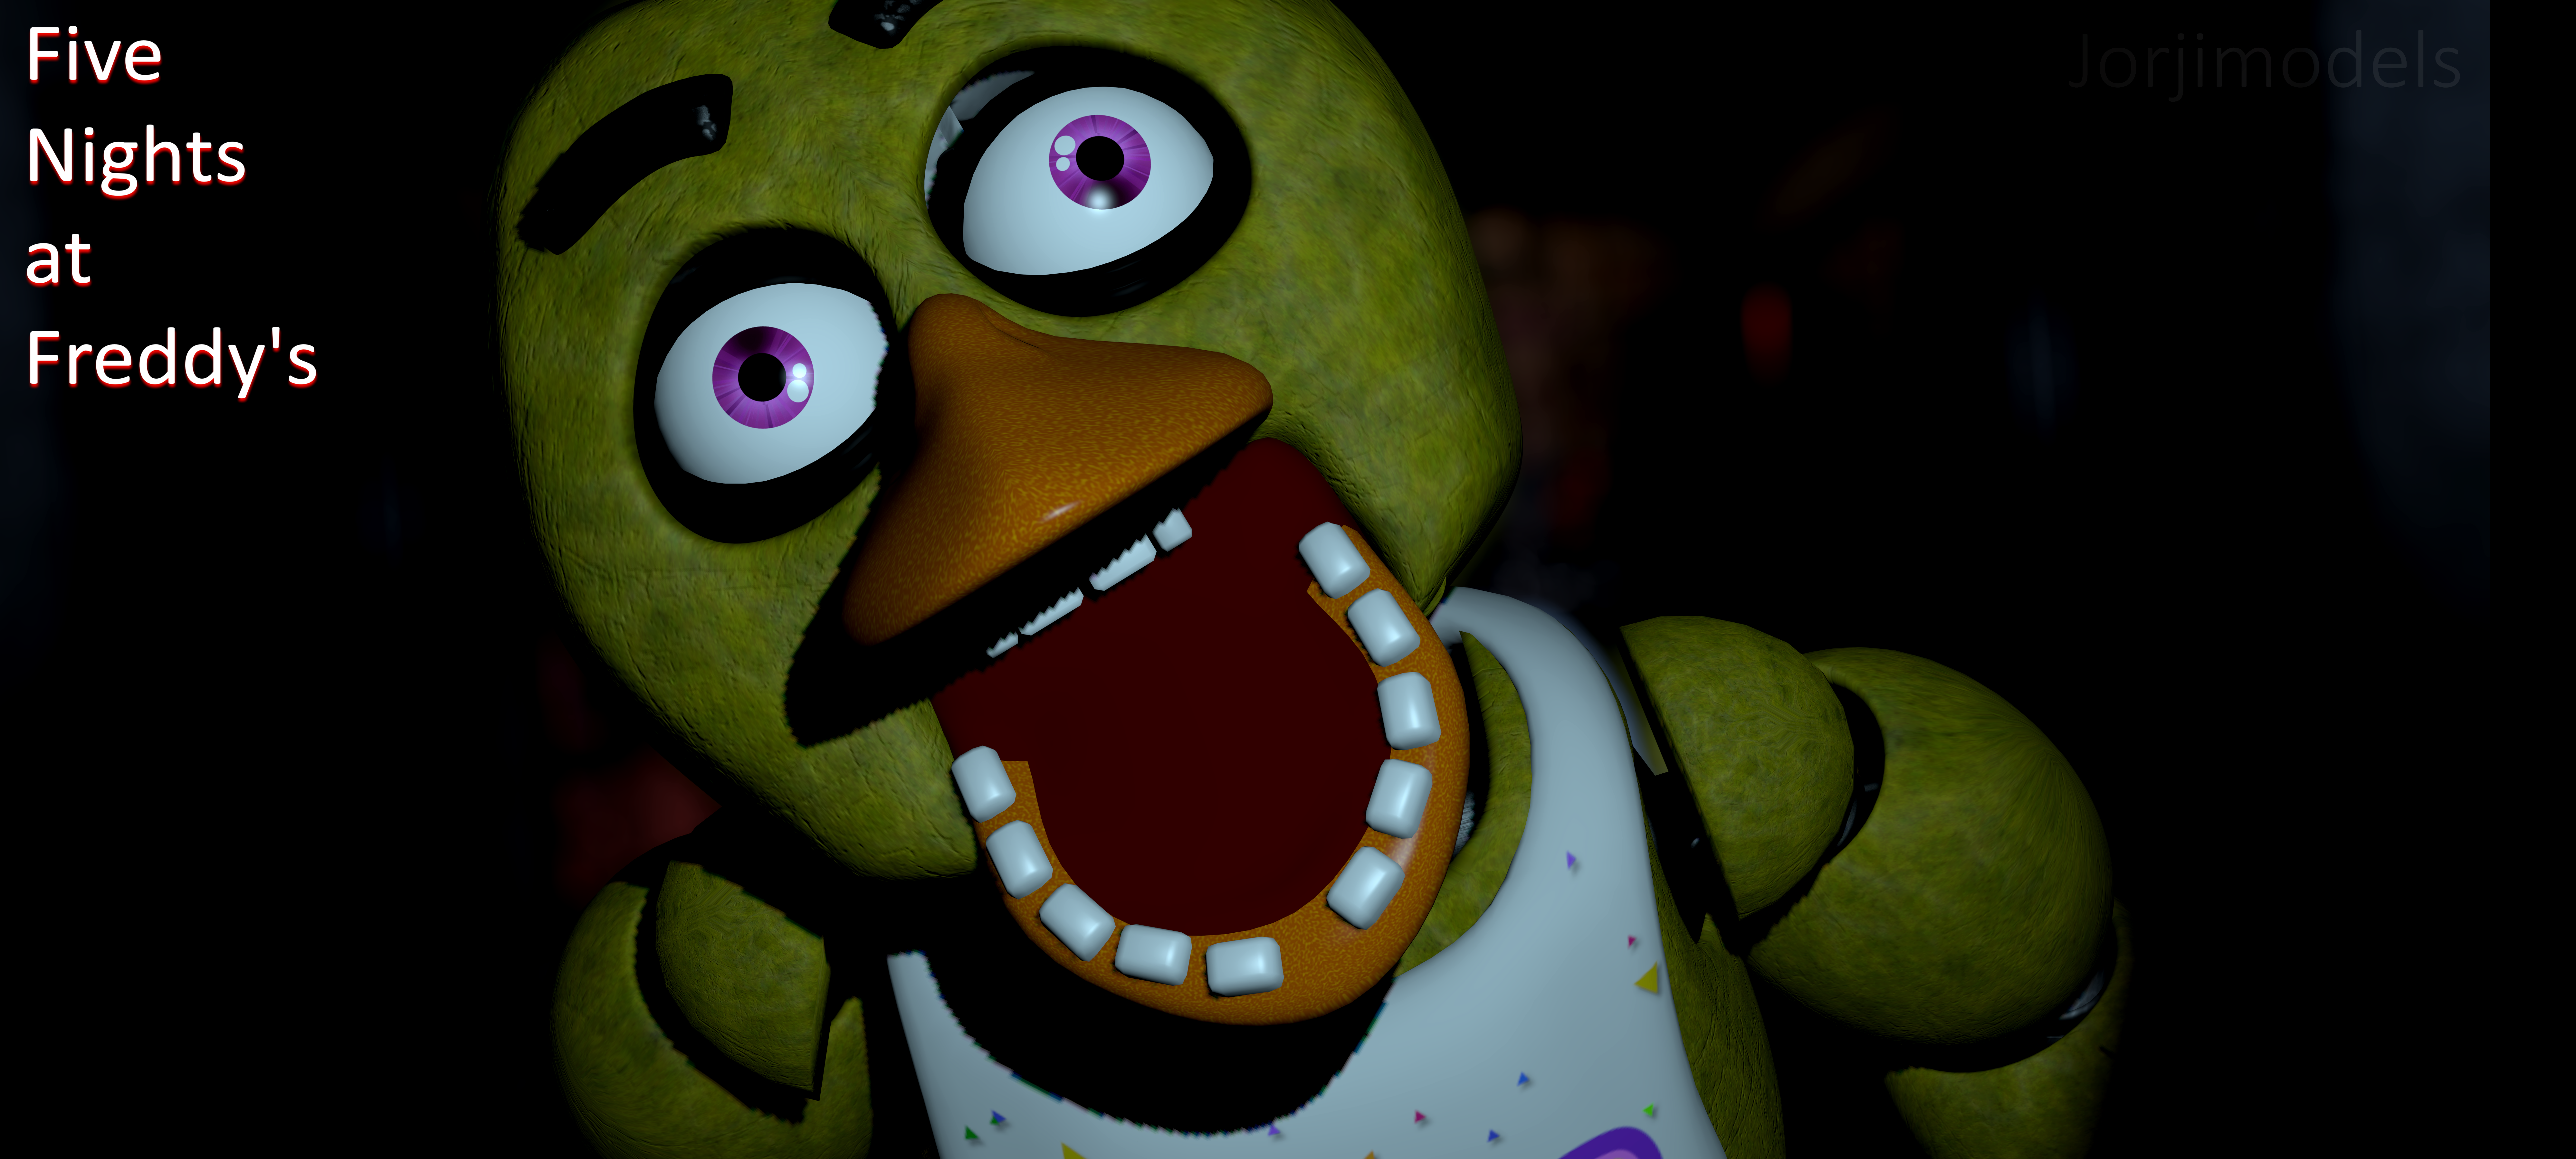 Video Game Five Nights At Freddy 039 S 7998x3600